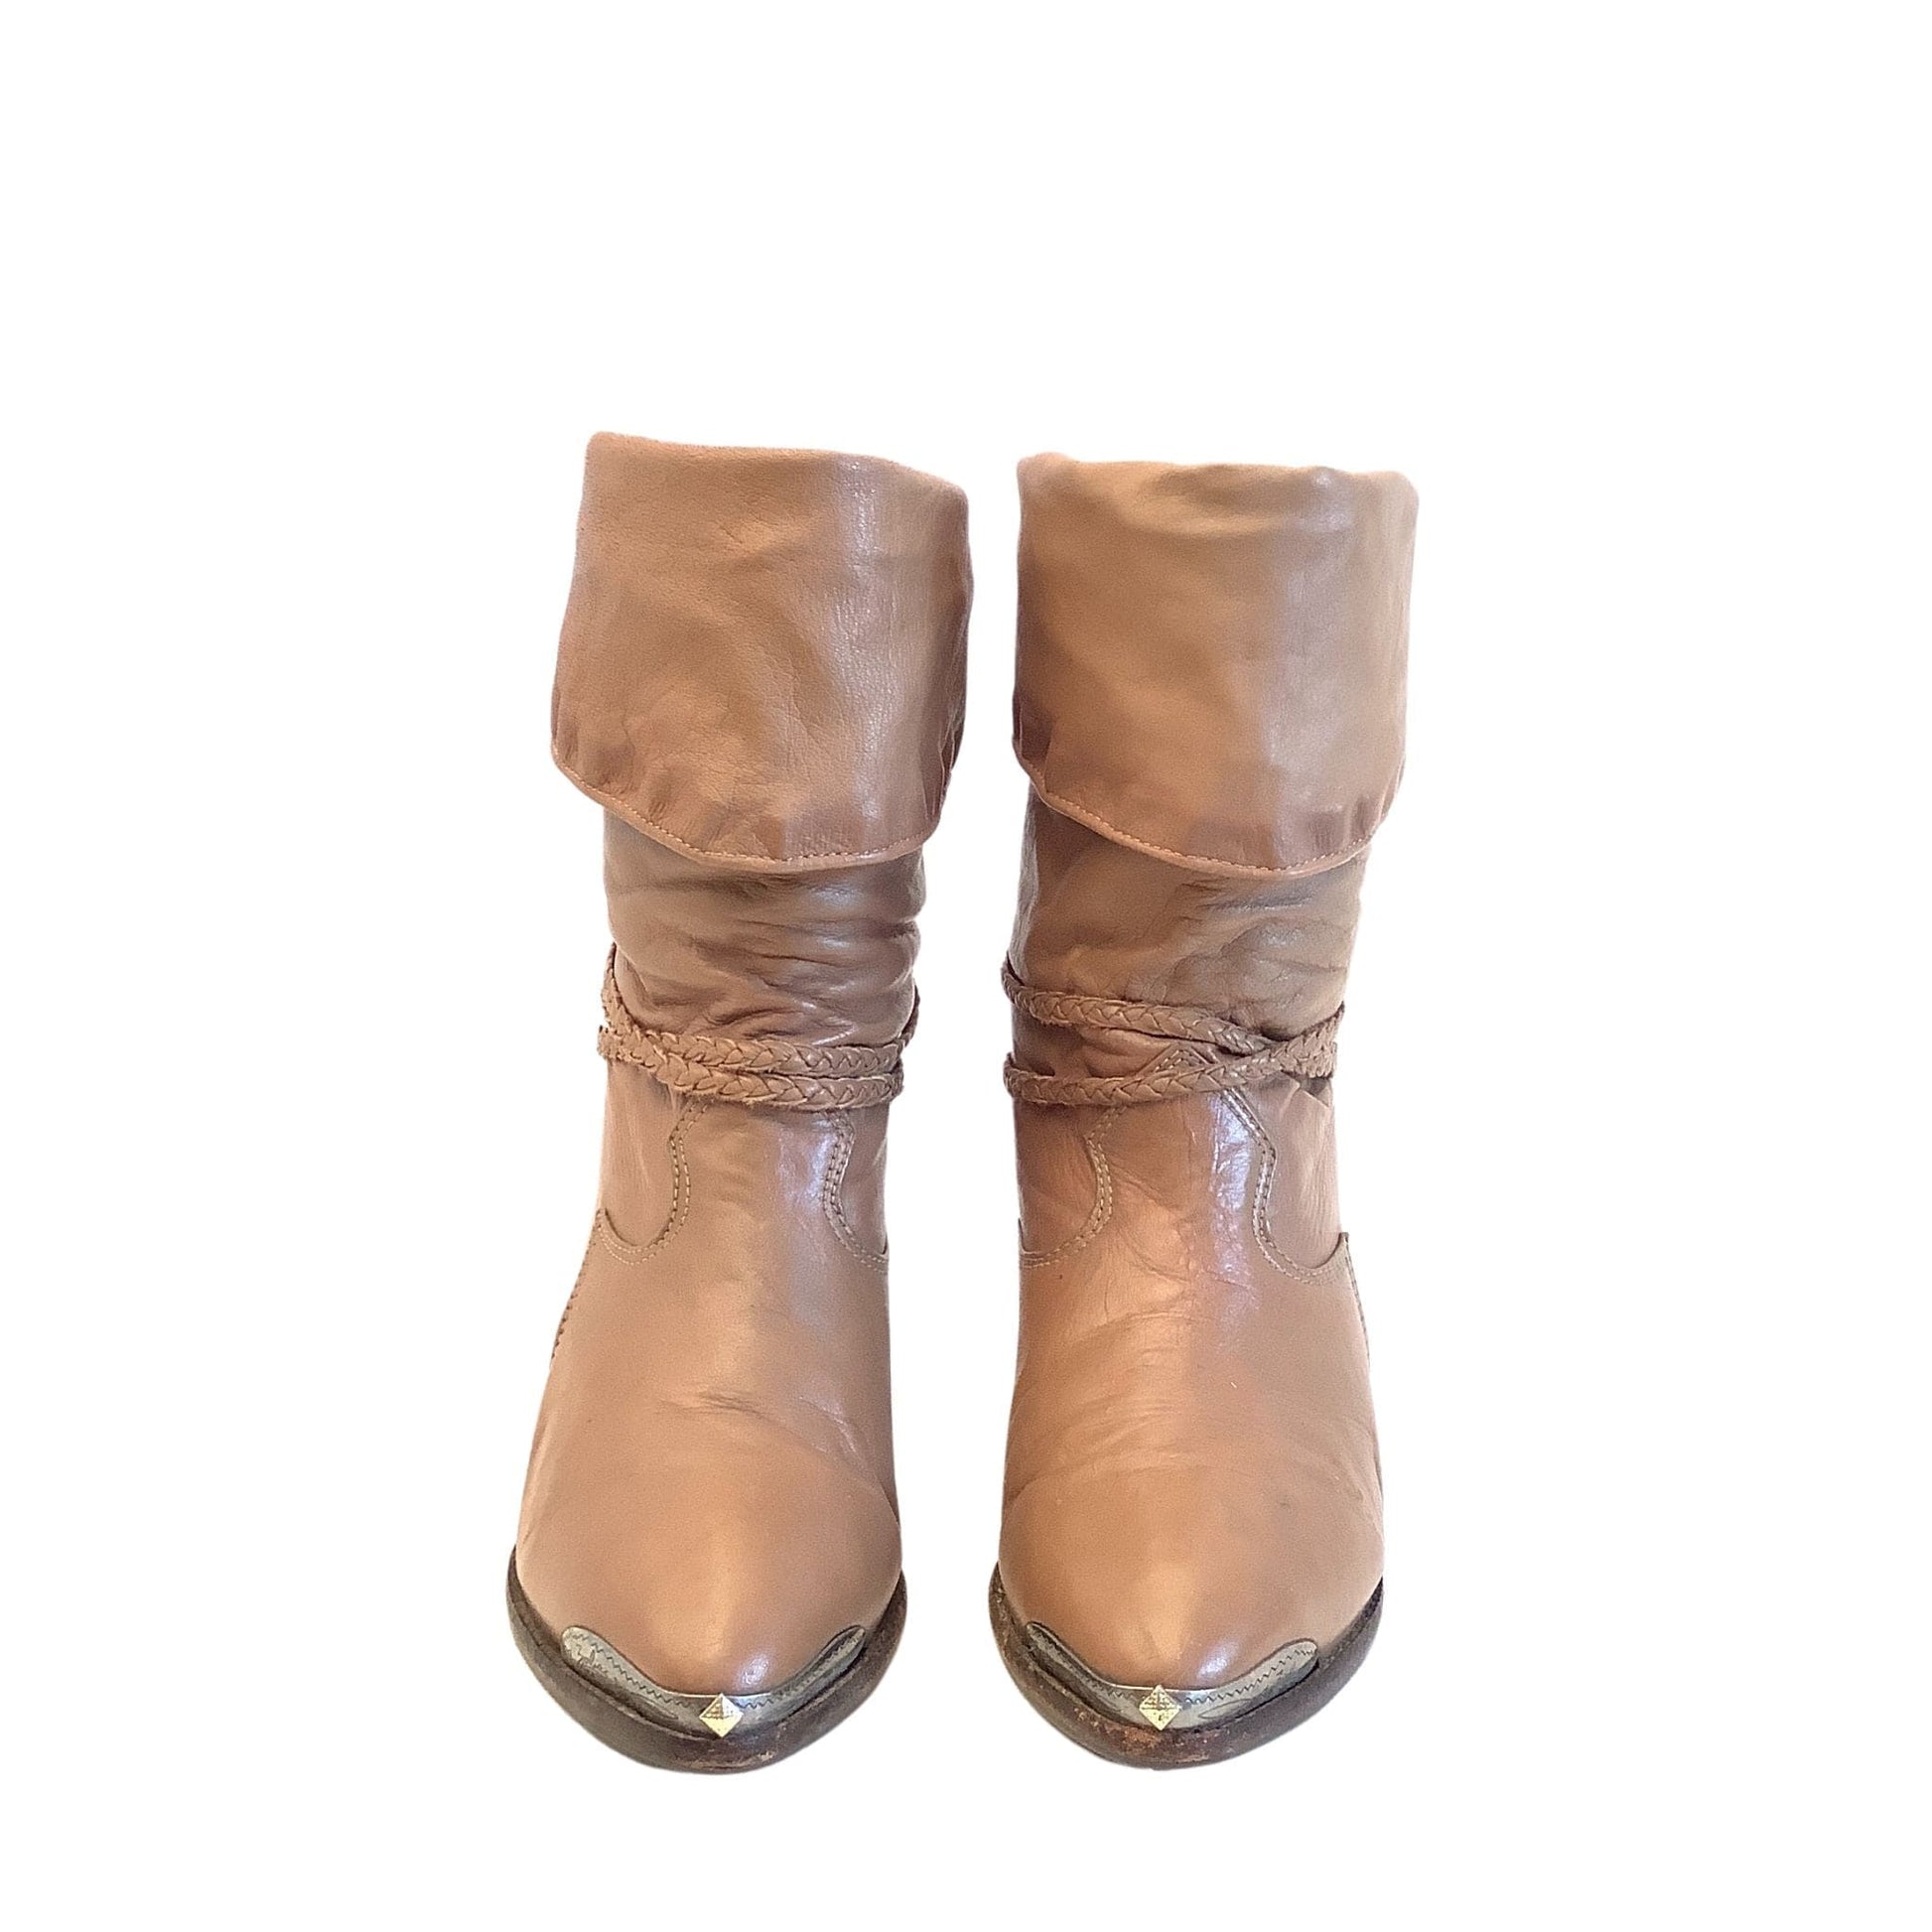 1980s Zodiac Slouch Boots 7 / Taupe / Vintage 1980s